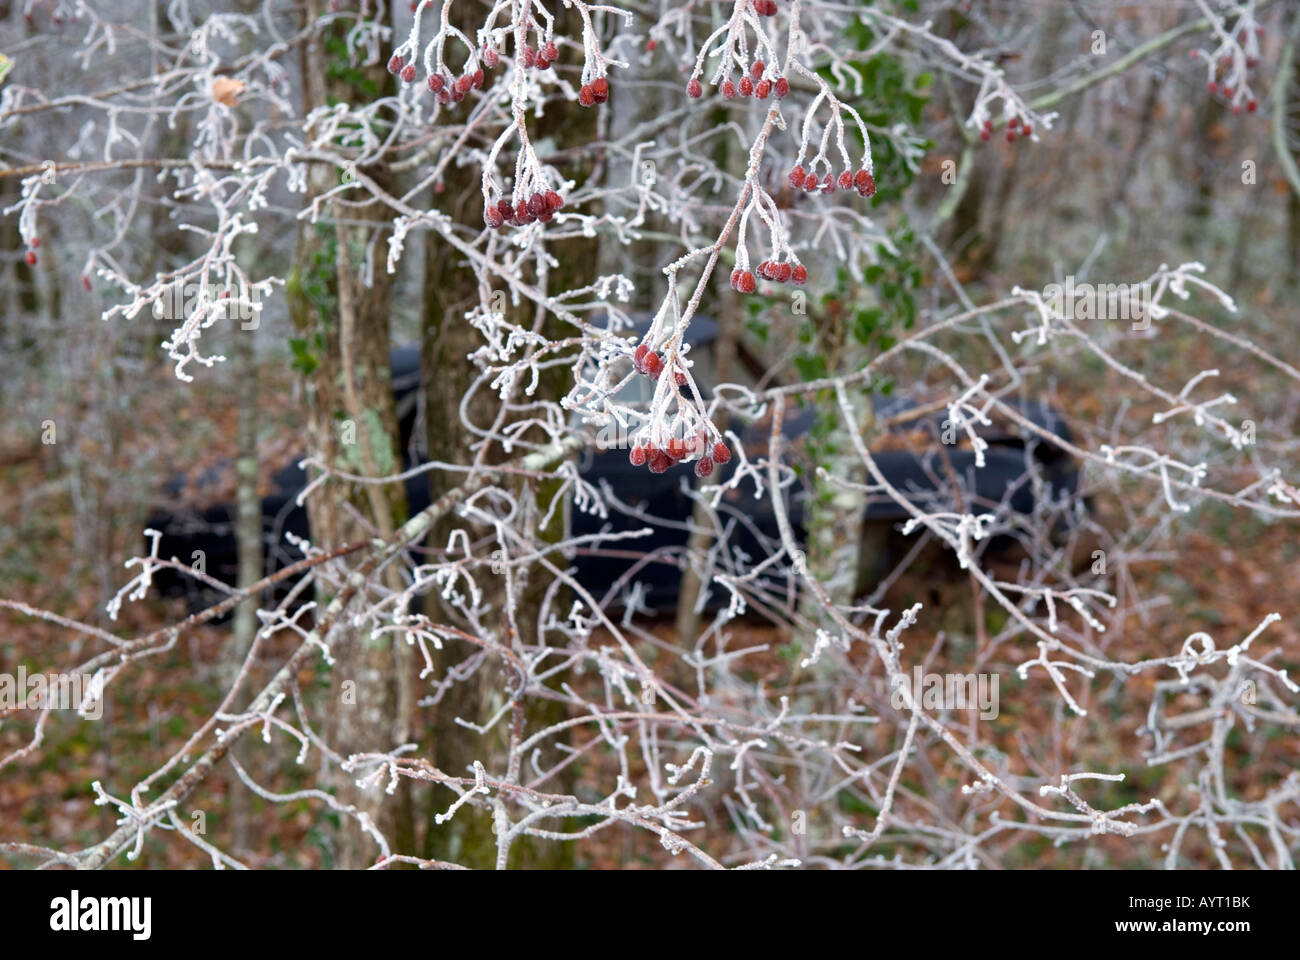 a view through frost covered branches of old derelict black vintage car lying forgotten in a wintry forest Stock Photo